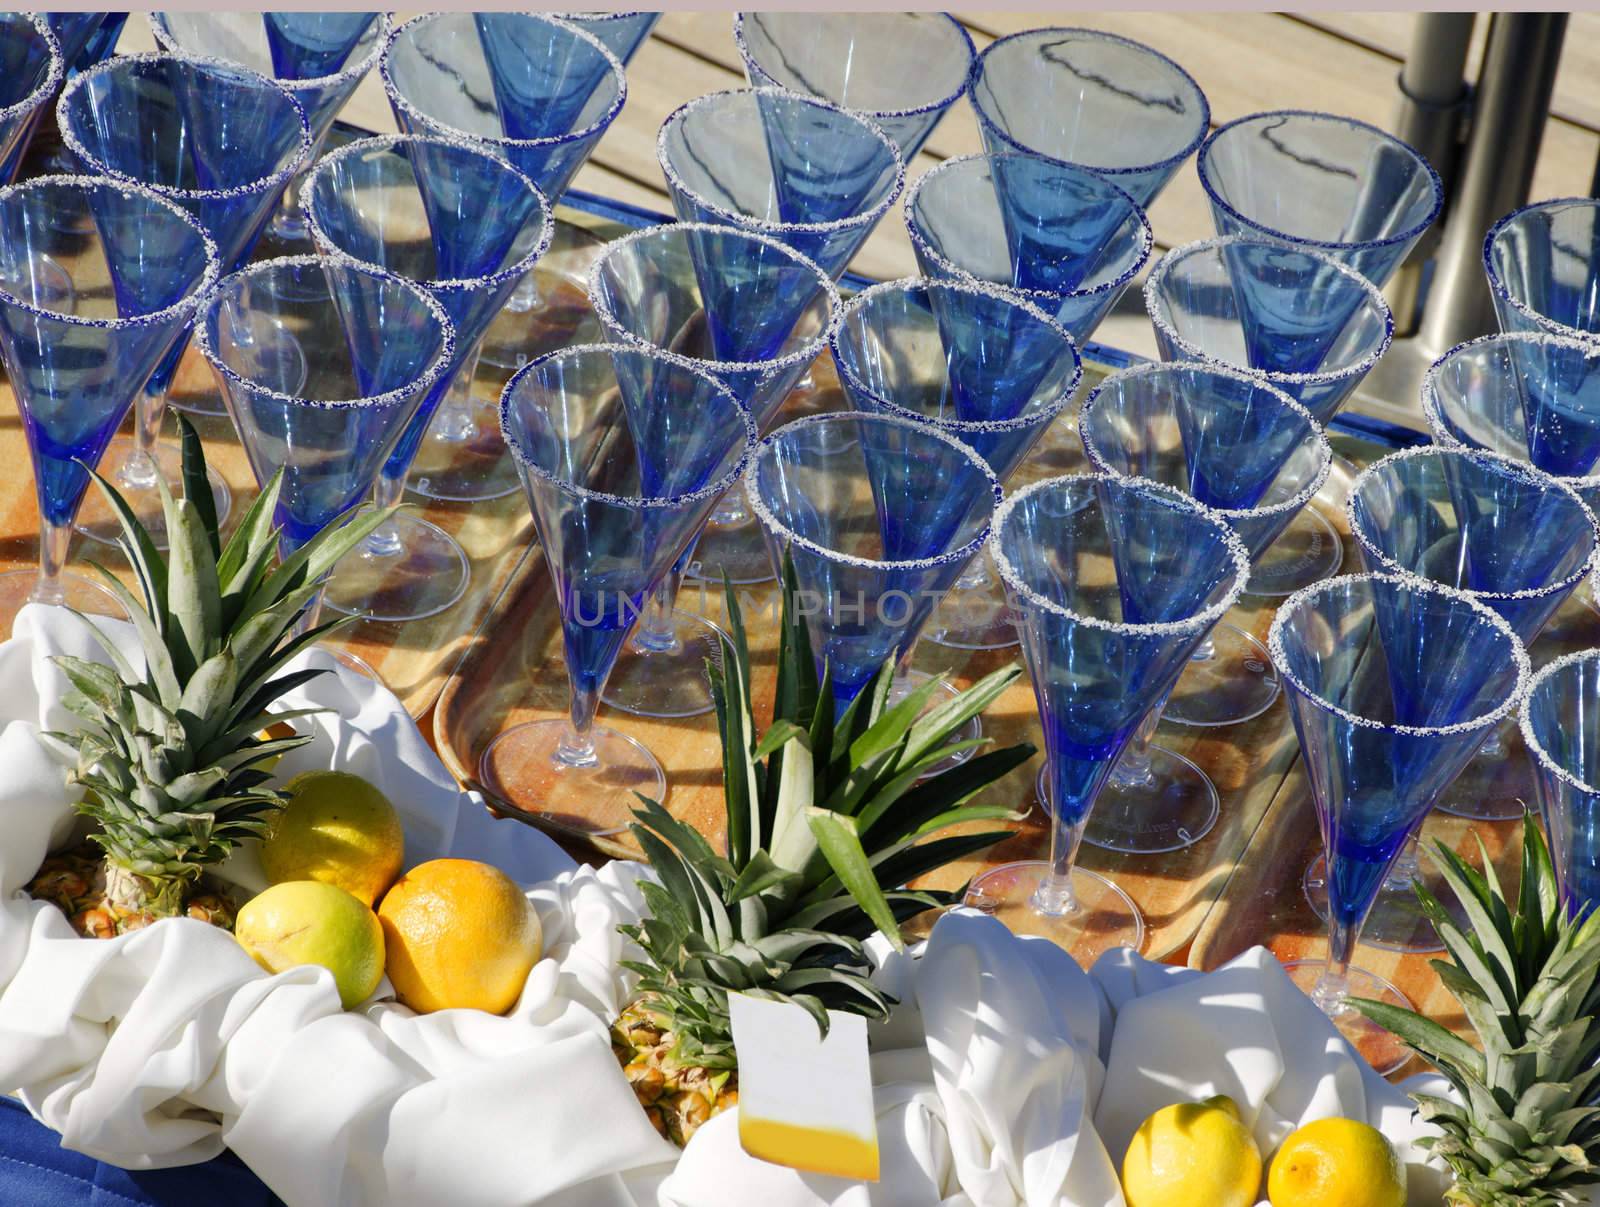 Margarita glasses lined up on a table